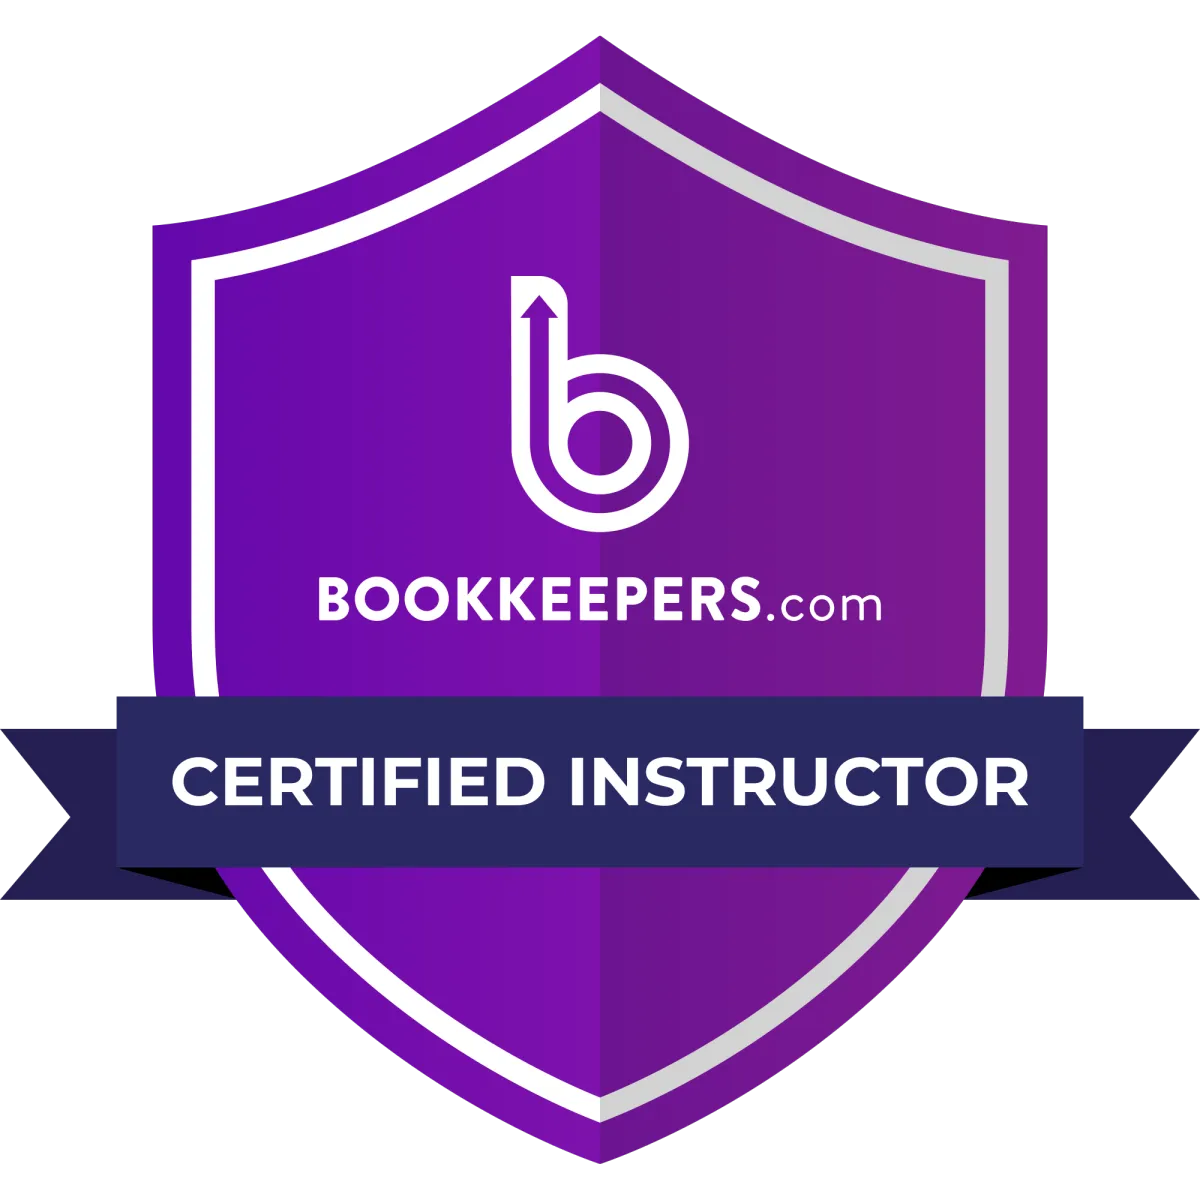 Bookkeepers.com Certified Instructor